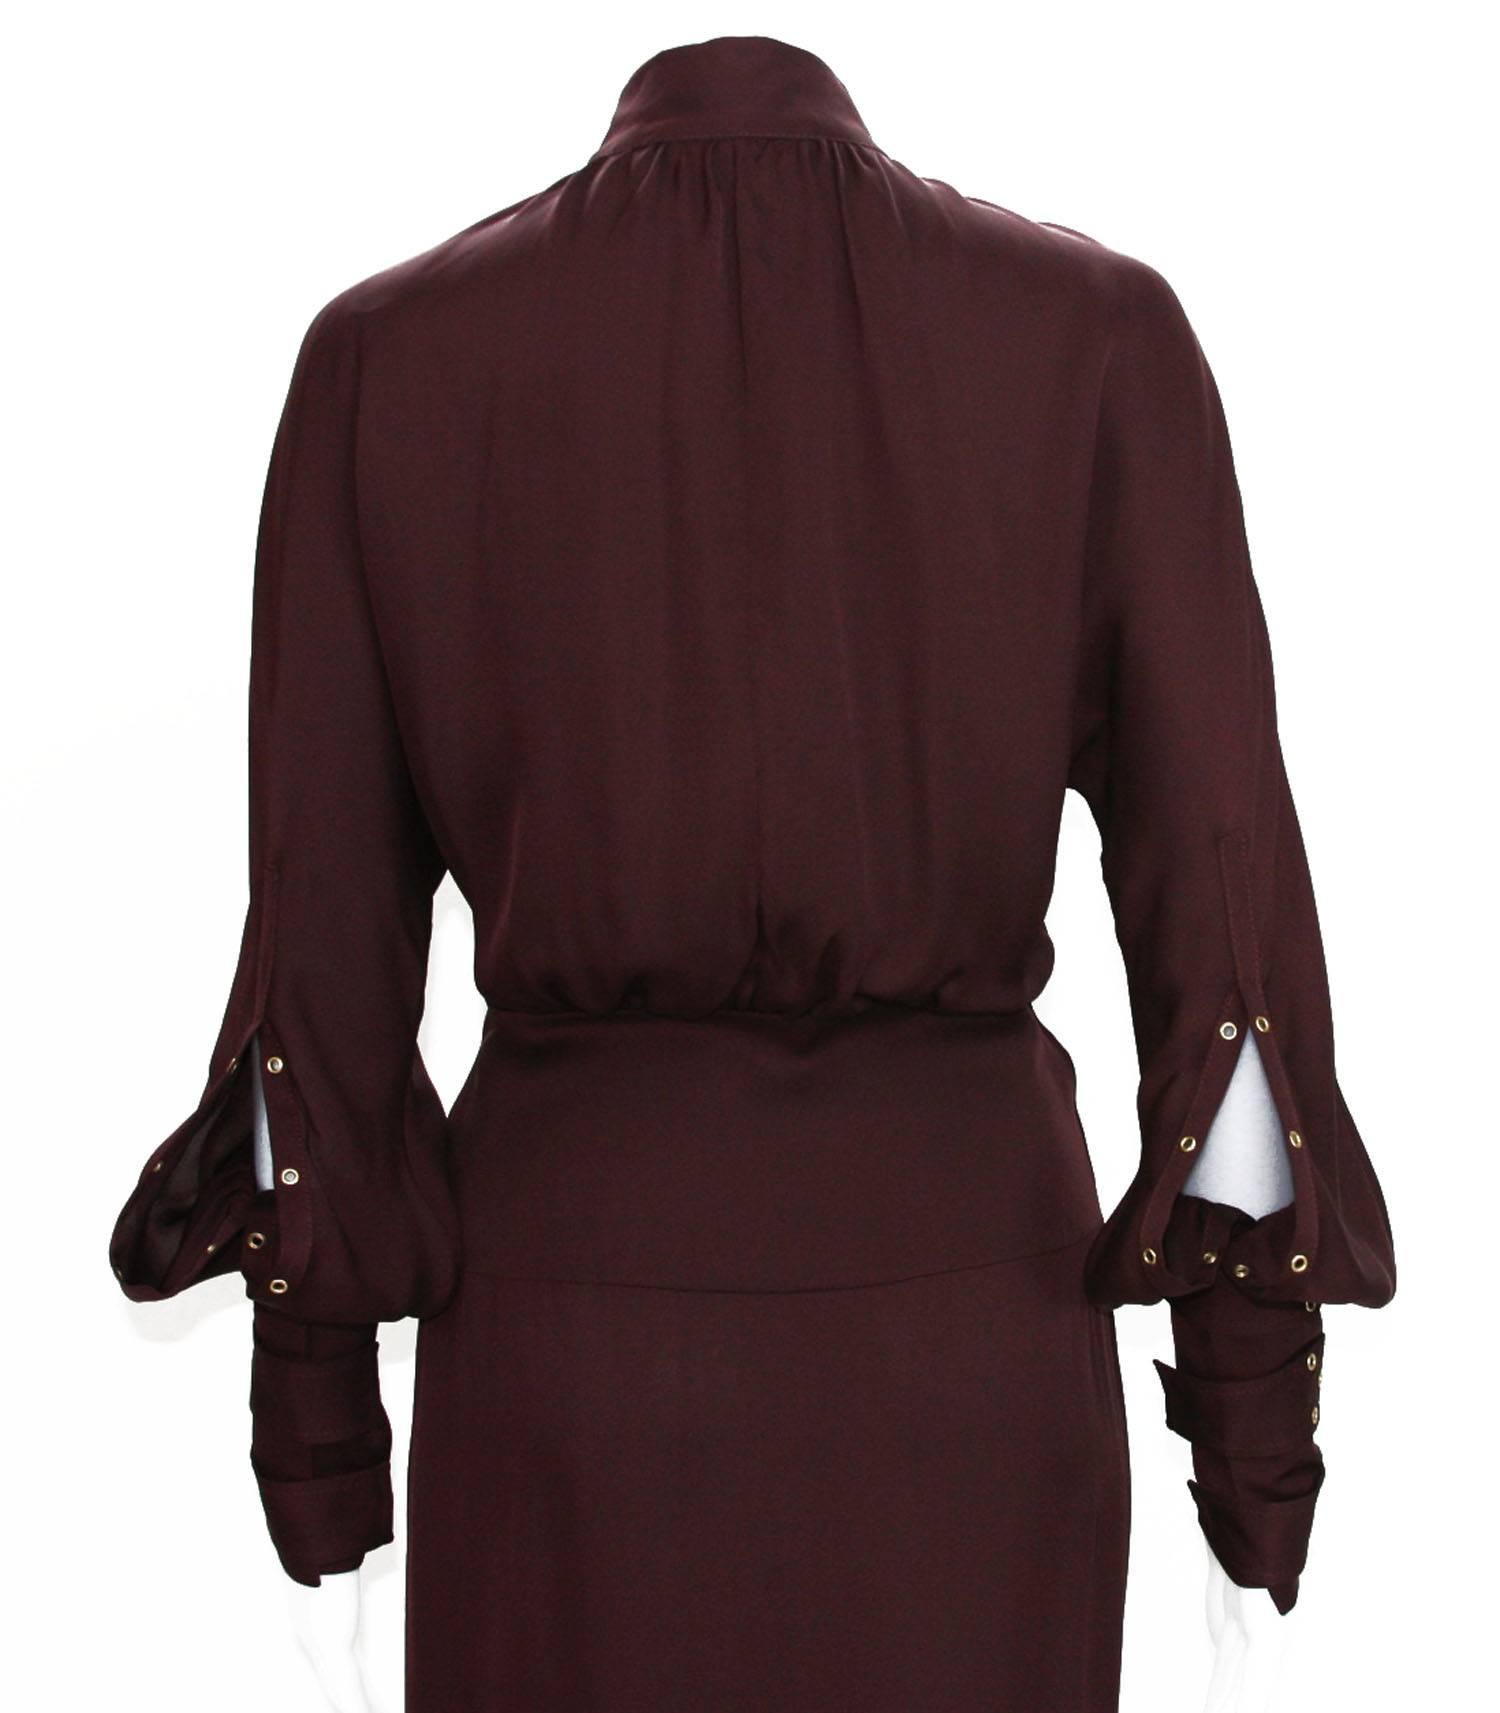 Tom Ford for Gucci 2003 Collection 3x Buckle Grommet Sleeve Burgundy Dress 40 -  For Sale 2